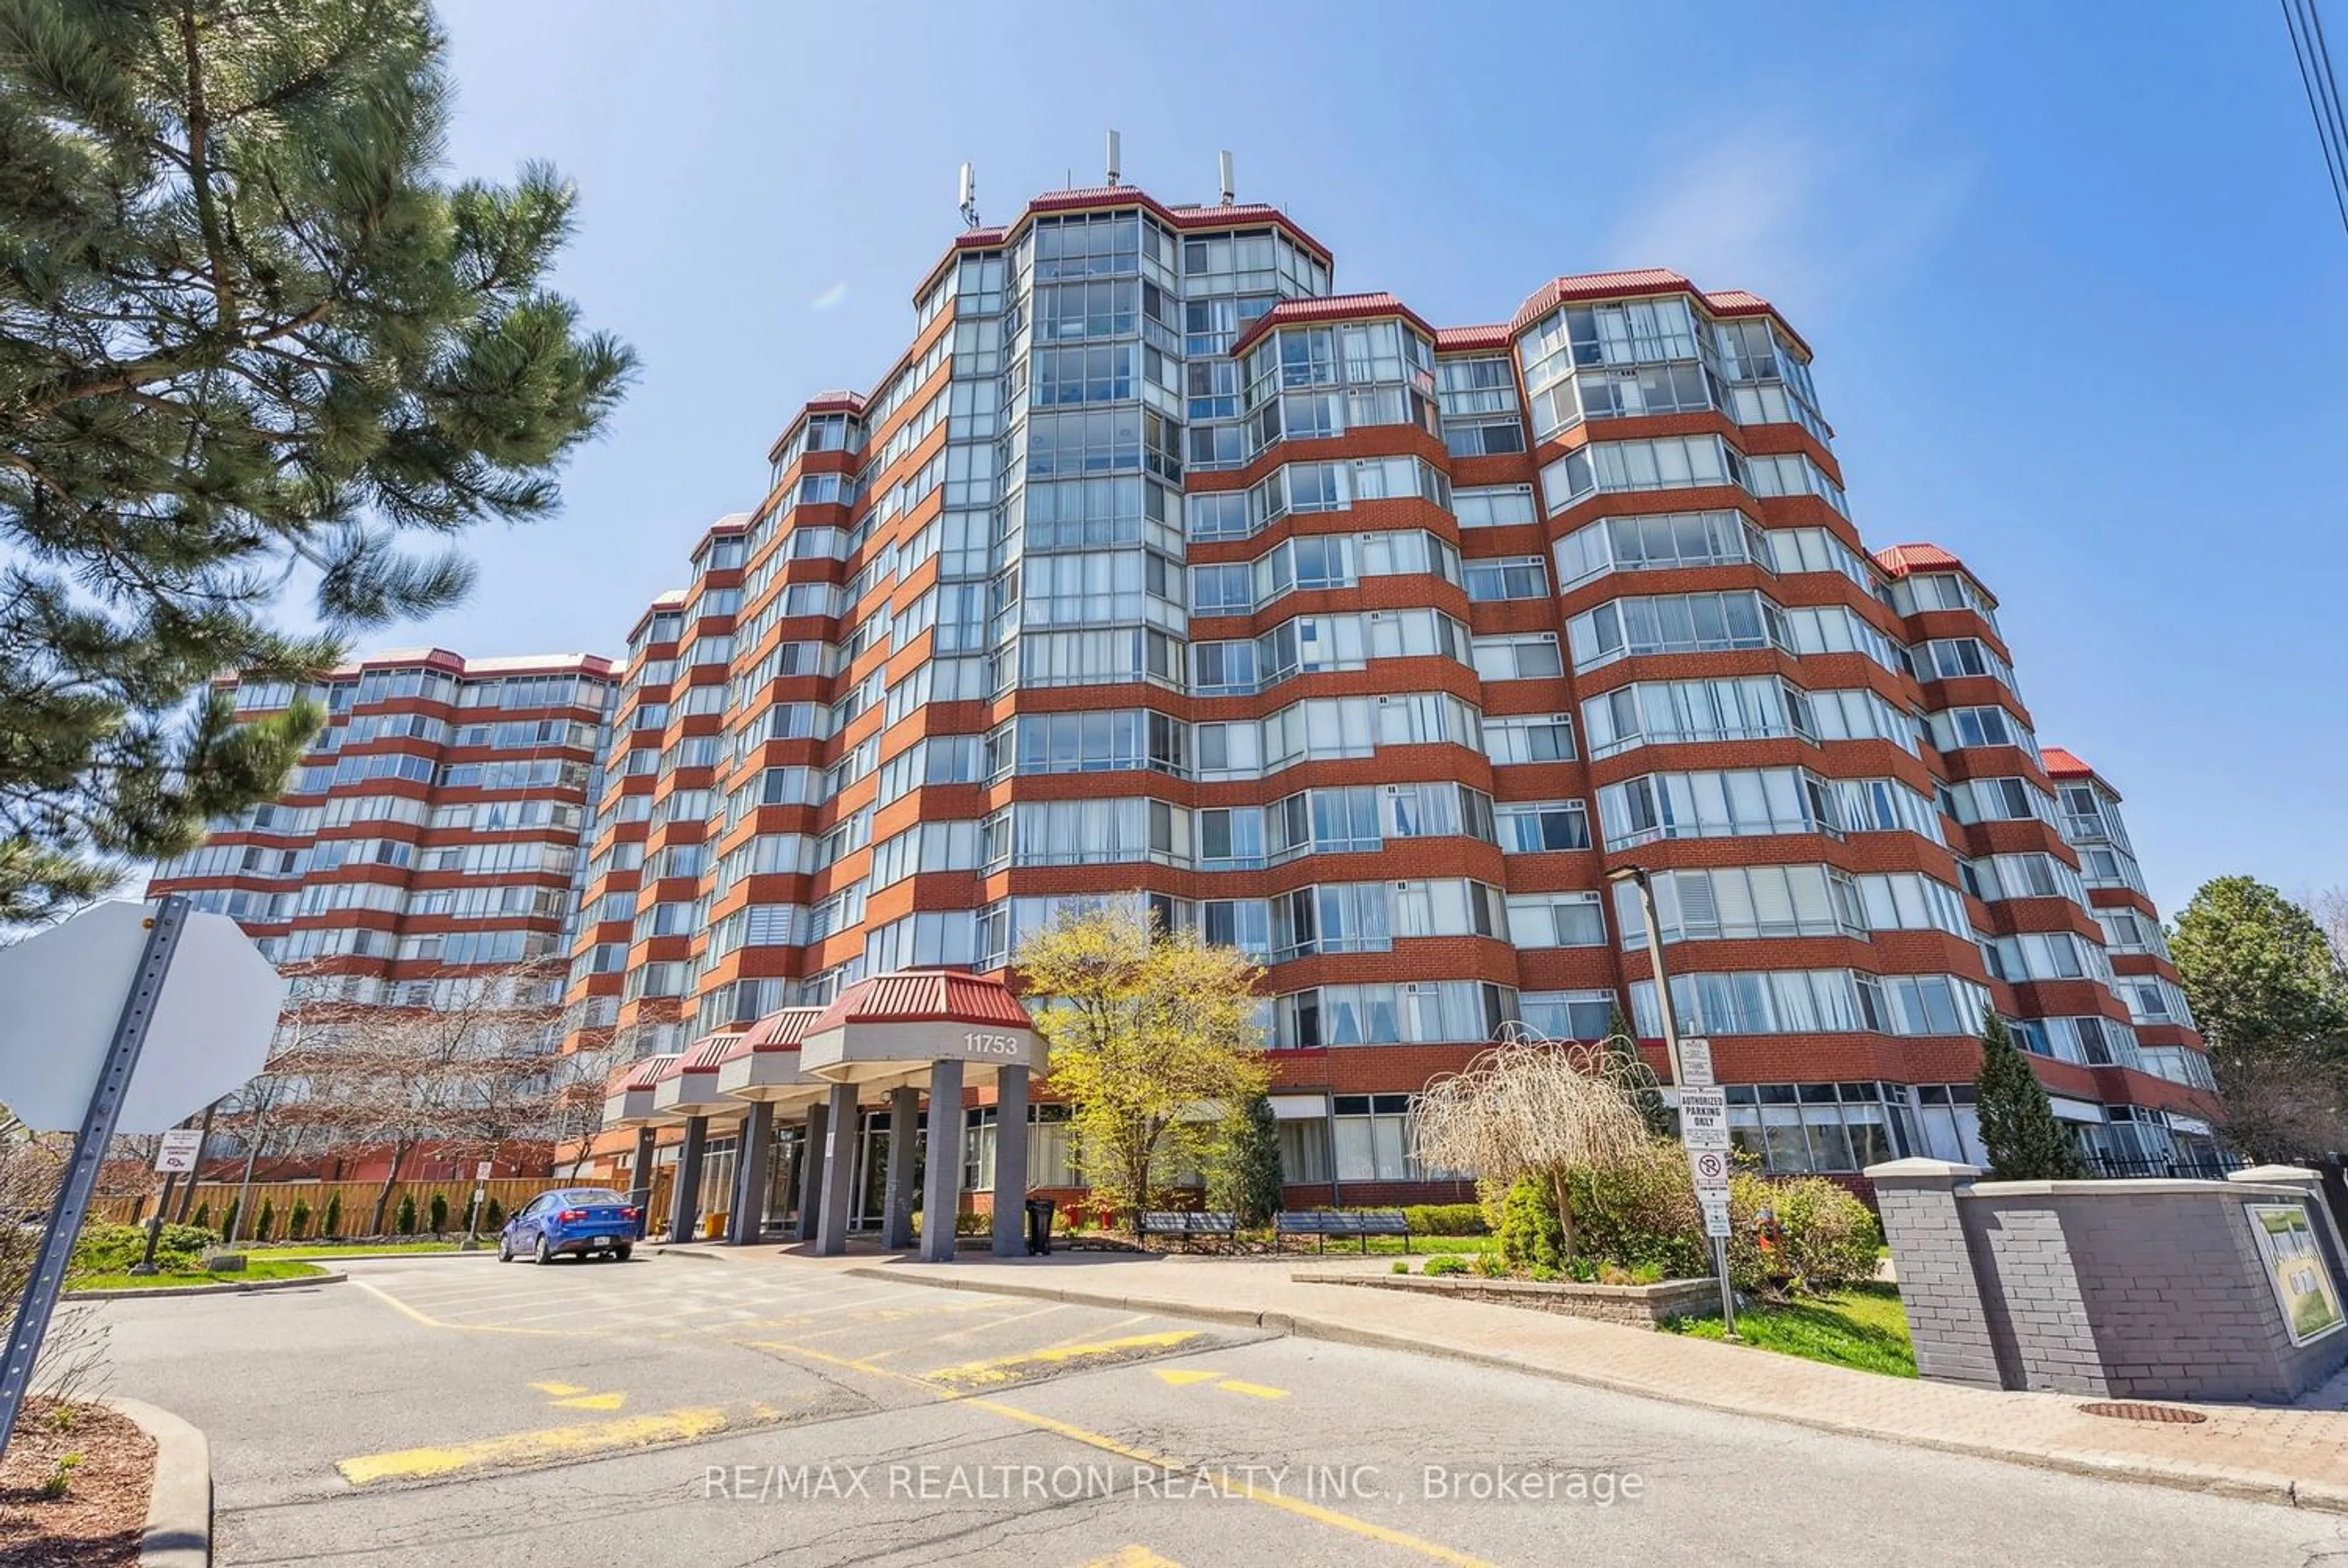 A pic from exterior of the house or condo for 11753 Sheppard Ave #420, Toronto Ontario M1B 5M3